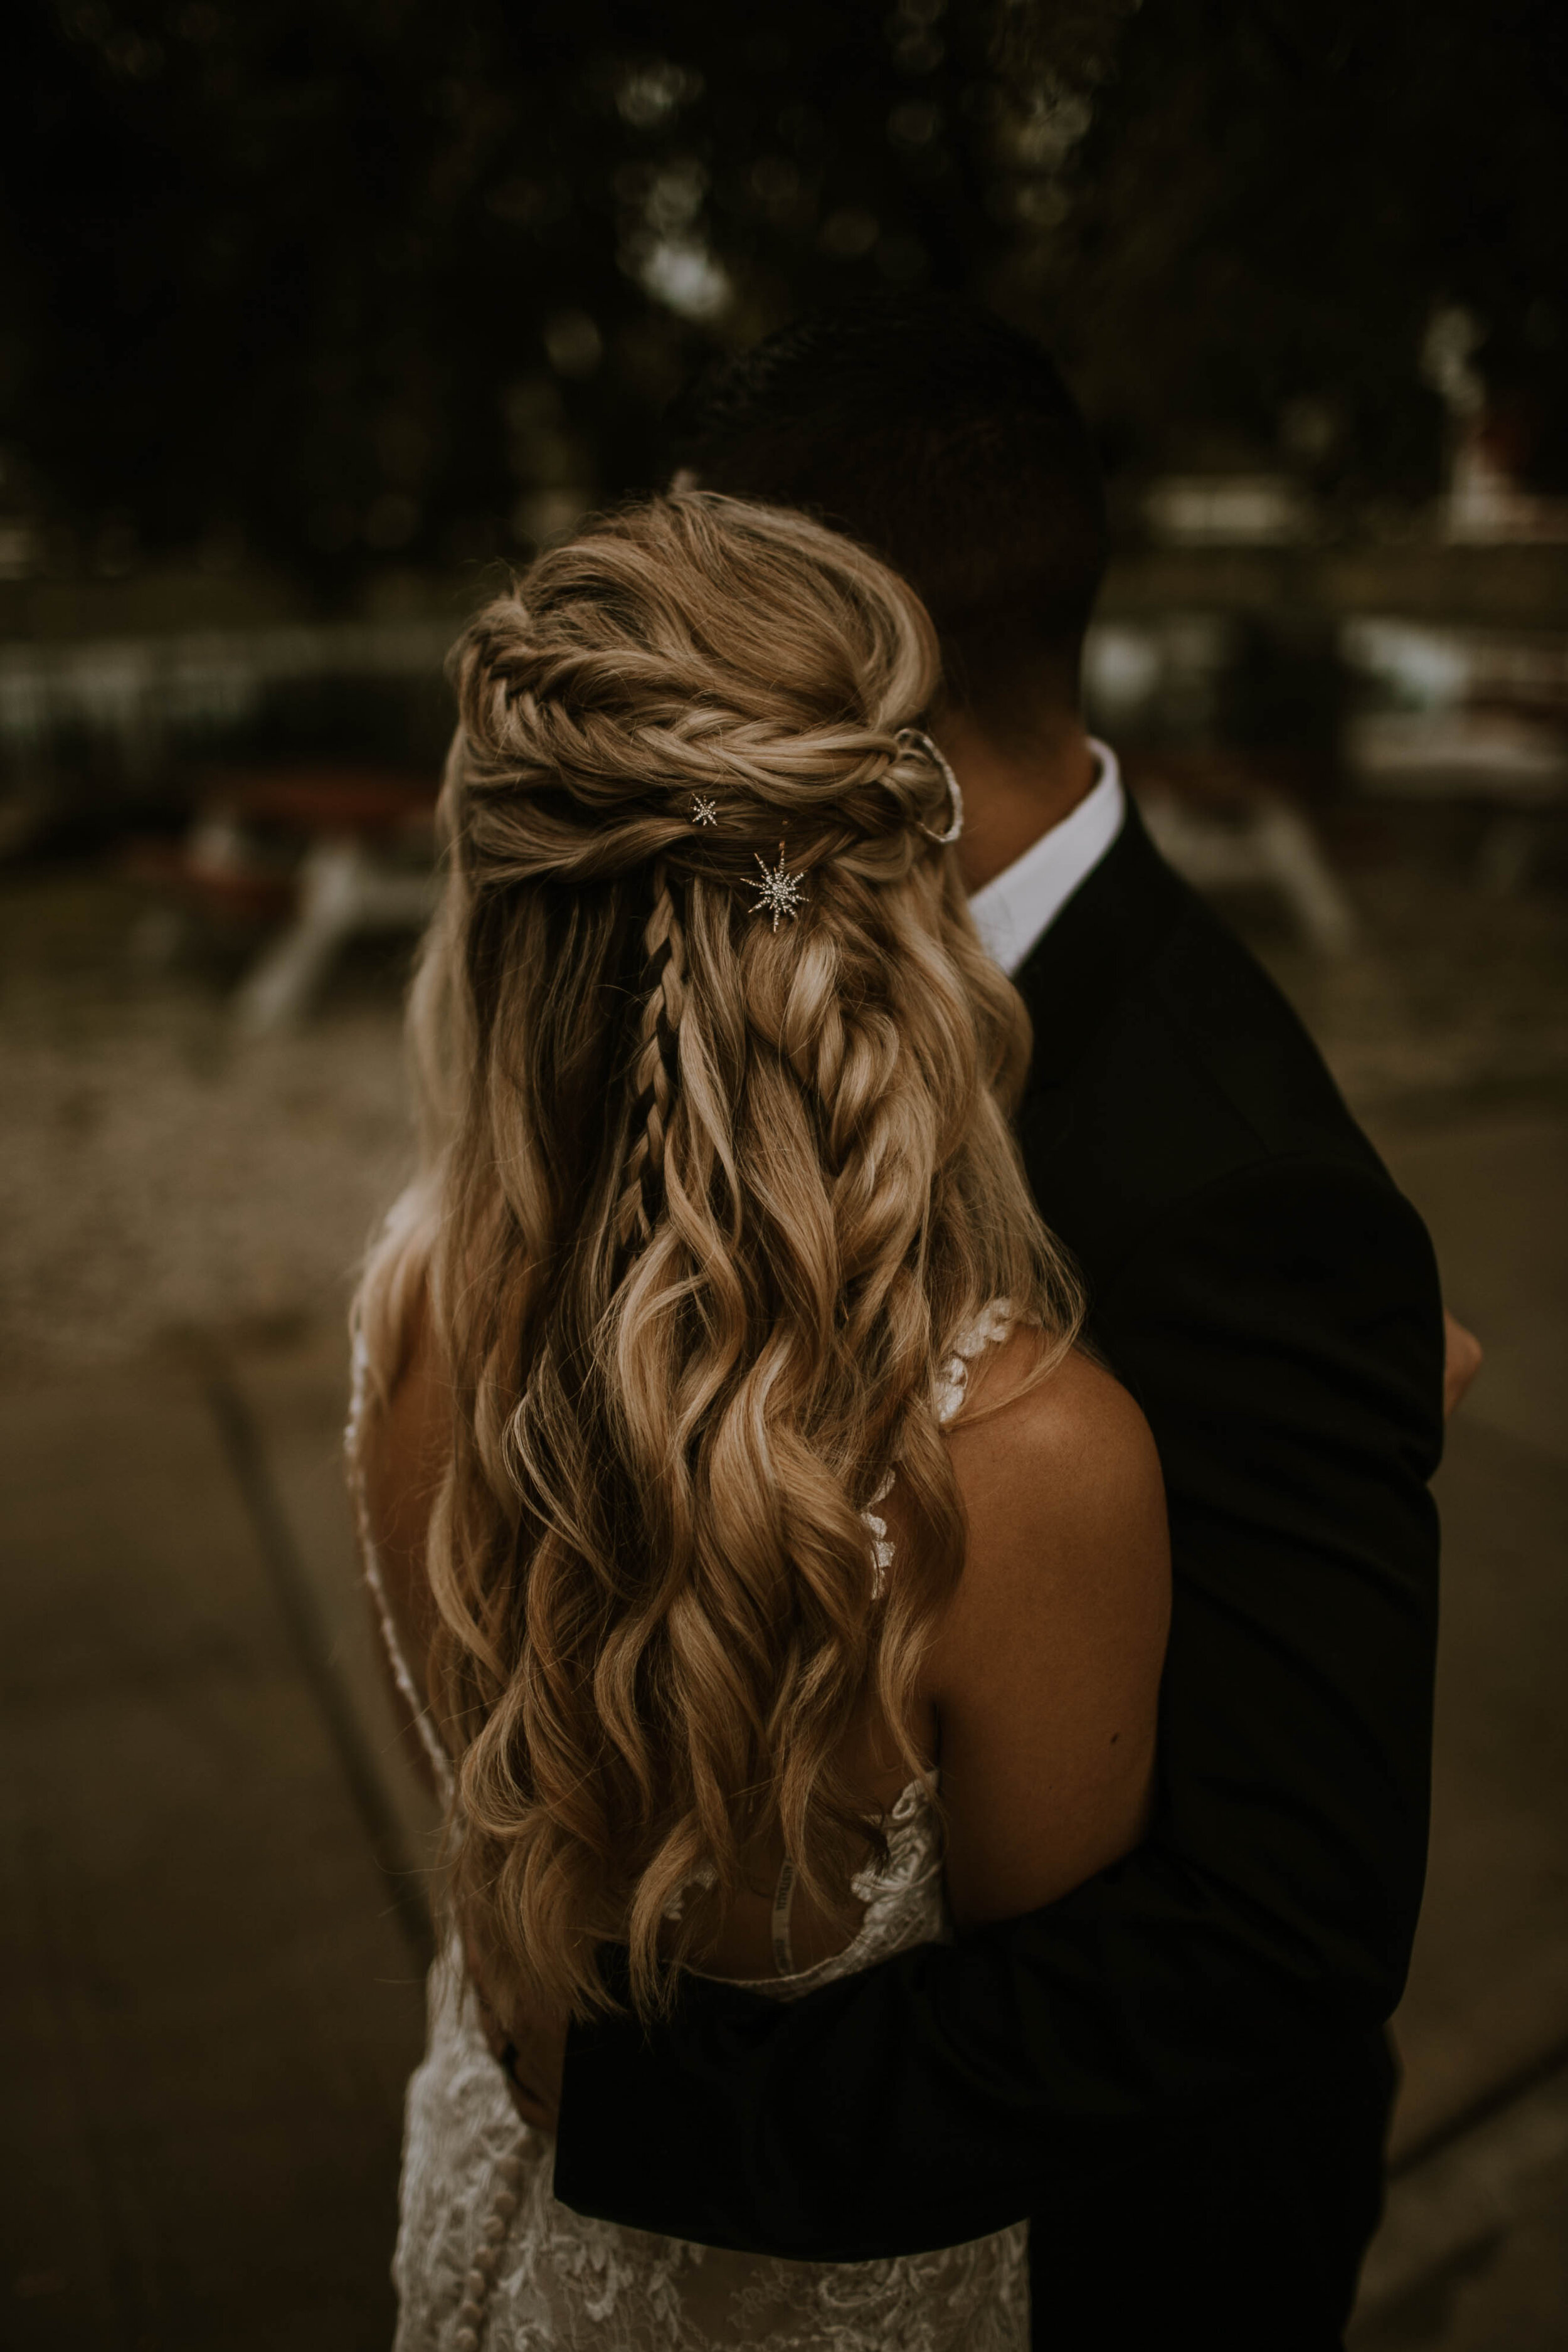 Braided wedding hair: Moody Fall Wedding Styled Shoot captured by Gabrielle Daylor Photography. See more fall wedding ideas at CHItheeWED.com!